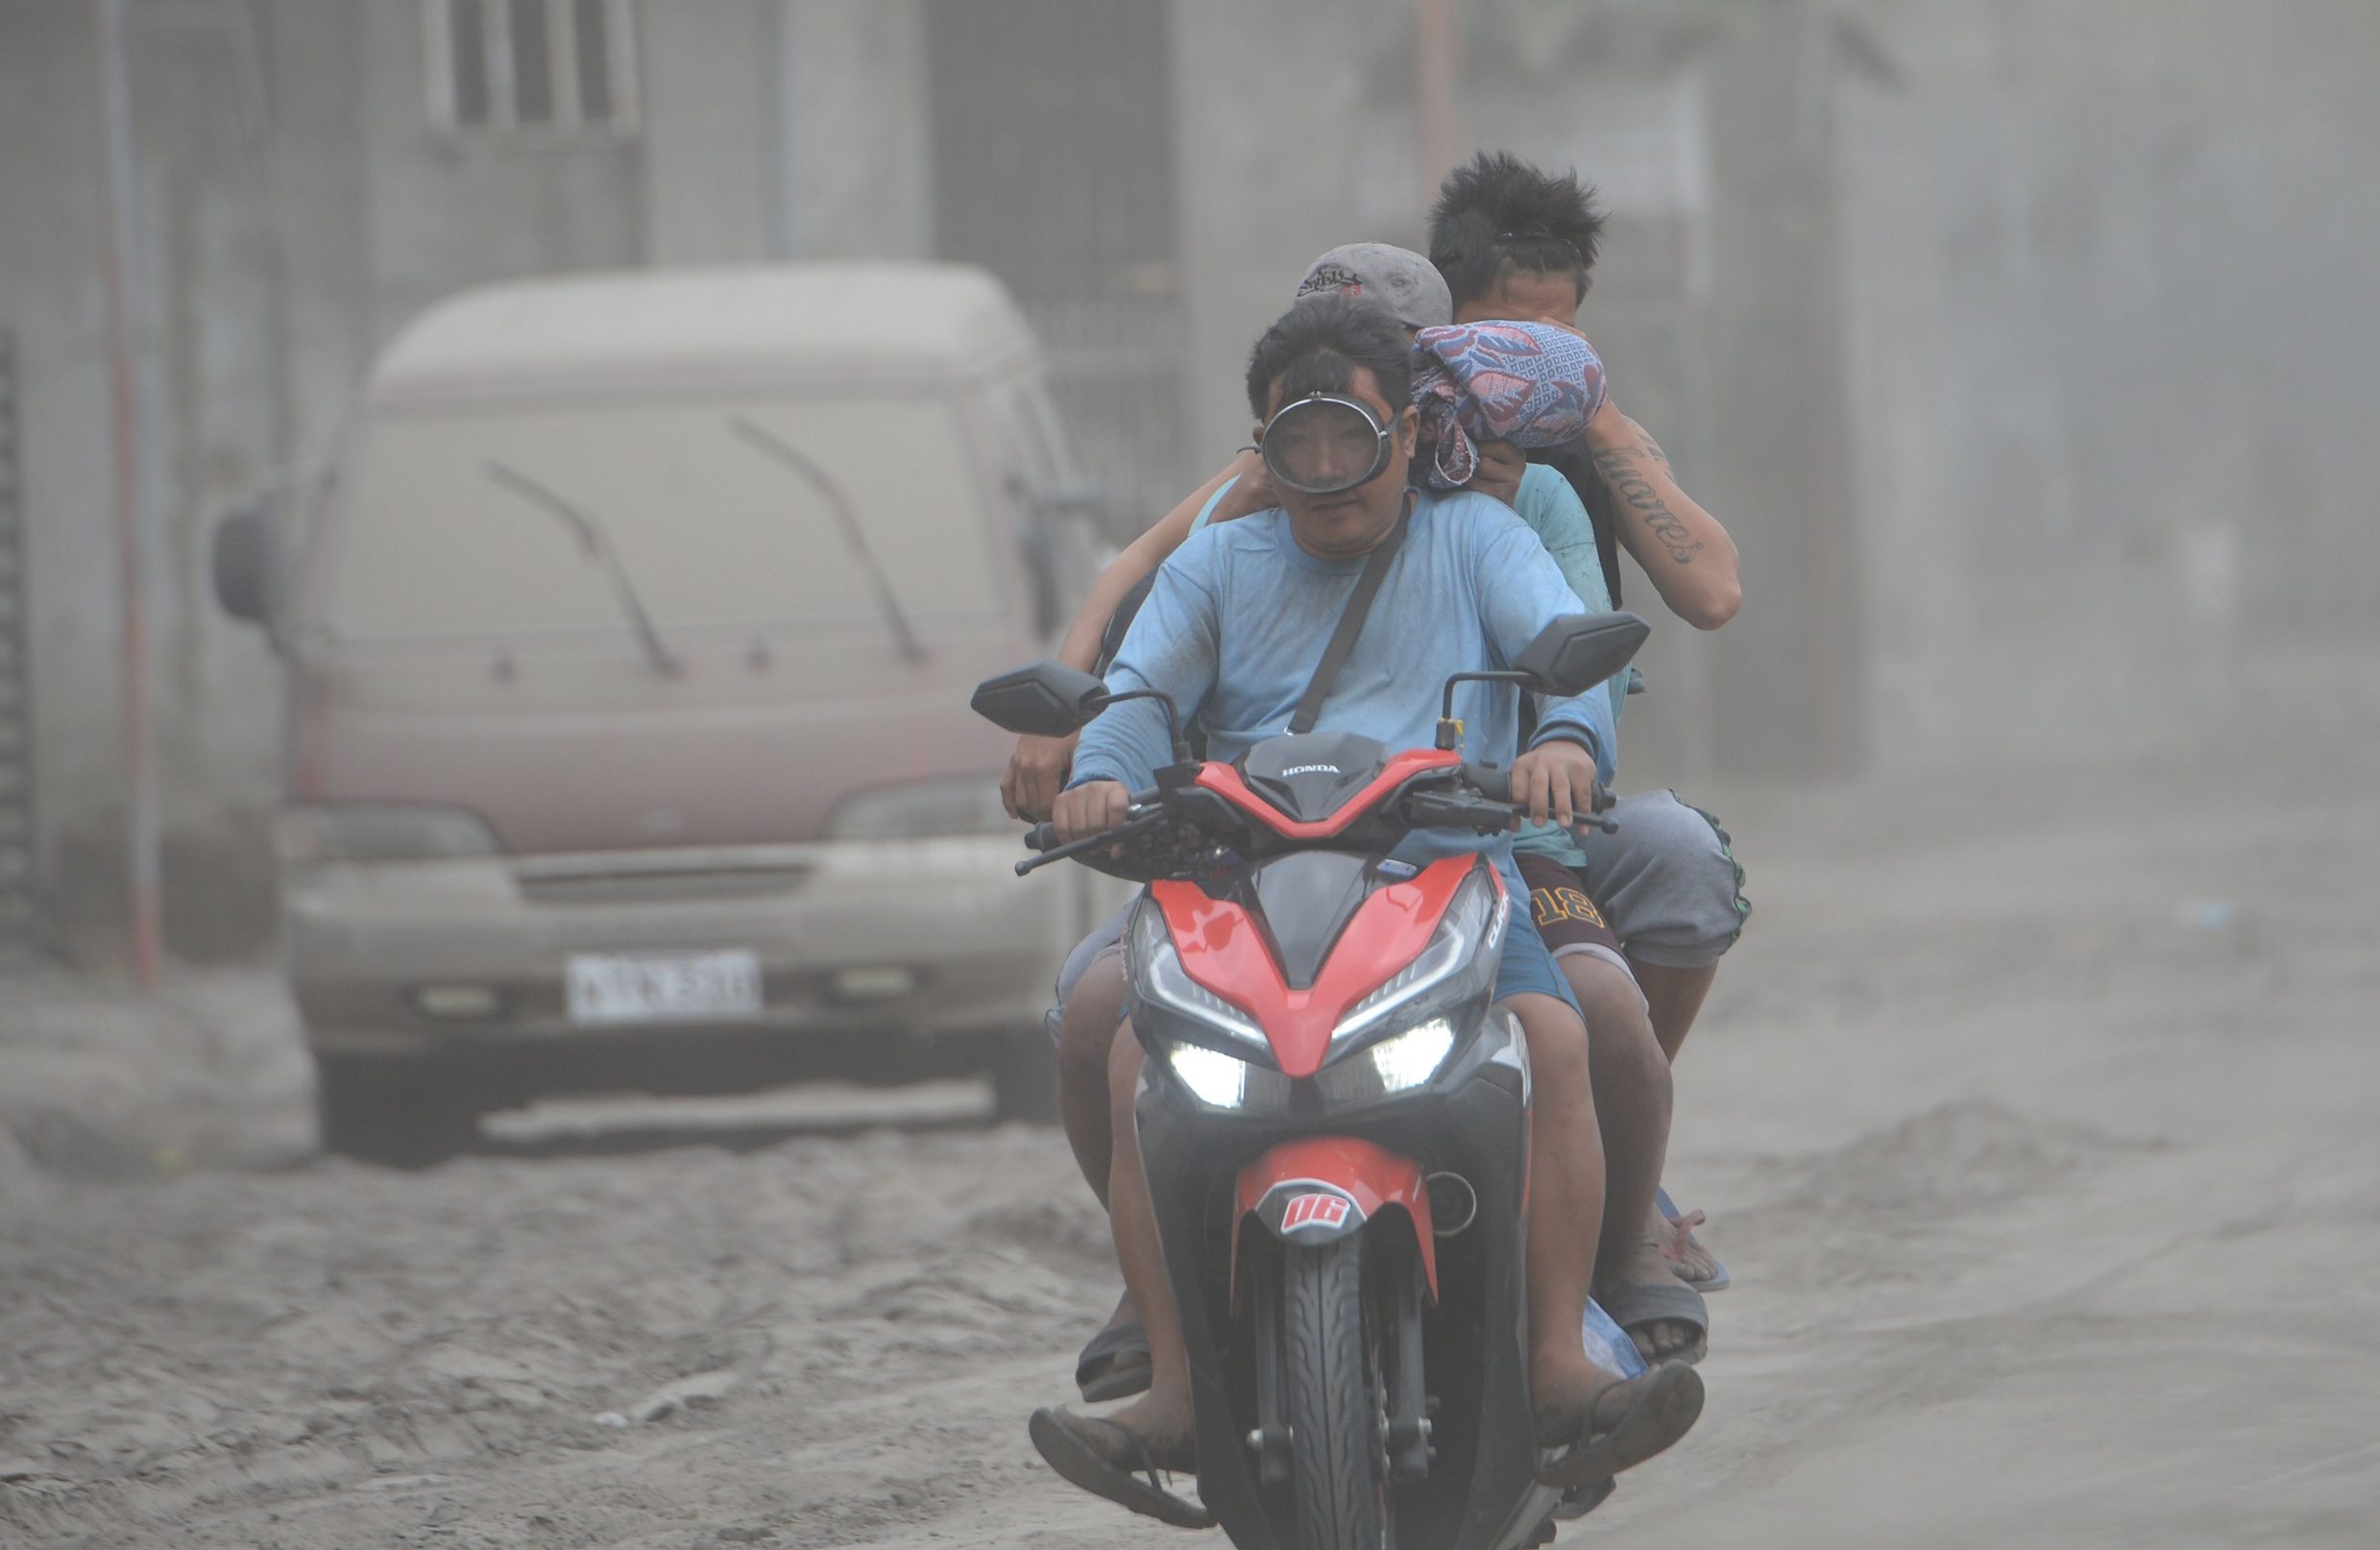 Residents riding on their motorcycle cover their faces as they traverse a road covered with ash, spewed by Taal volcano in Agoncillo town, Batangas province south of Manila on January 15, 2020. - Taal volcano in the Philippines could spew lava and ash for weeks, authorities warned on January 14, leaving thousands in limbo after fleeing their homes fearing a massive eruption. (Photo by Ted ALJIBE / AFP)